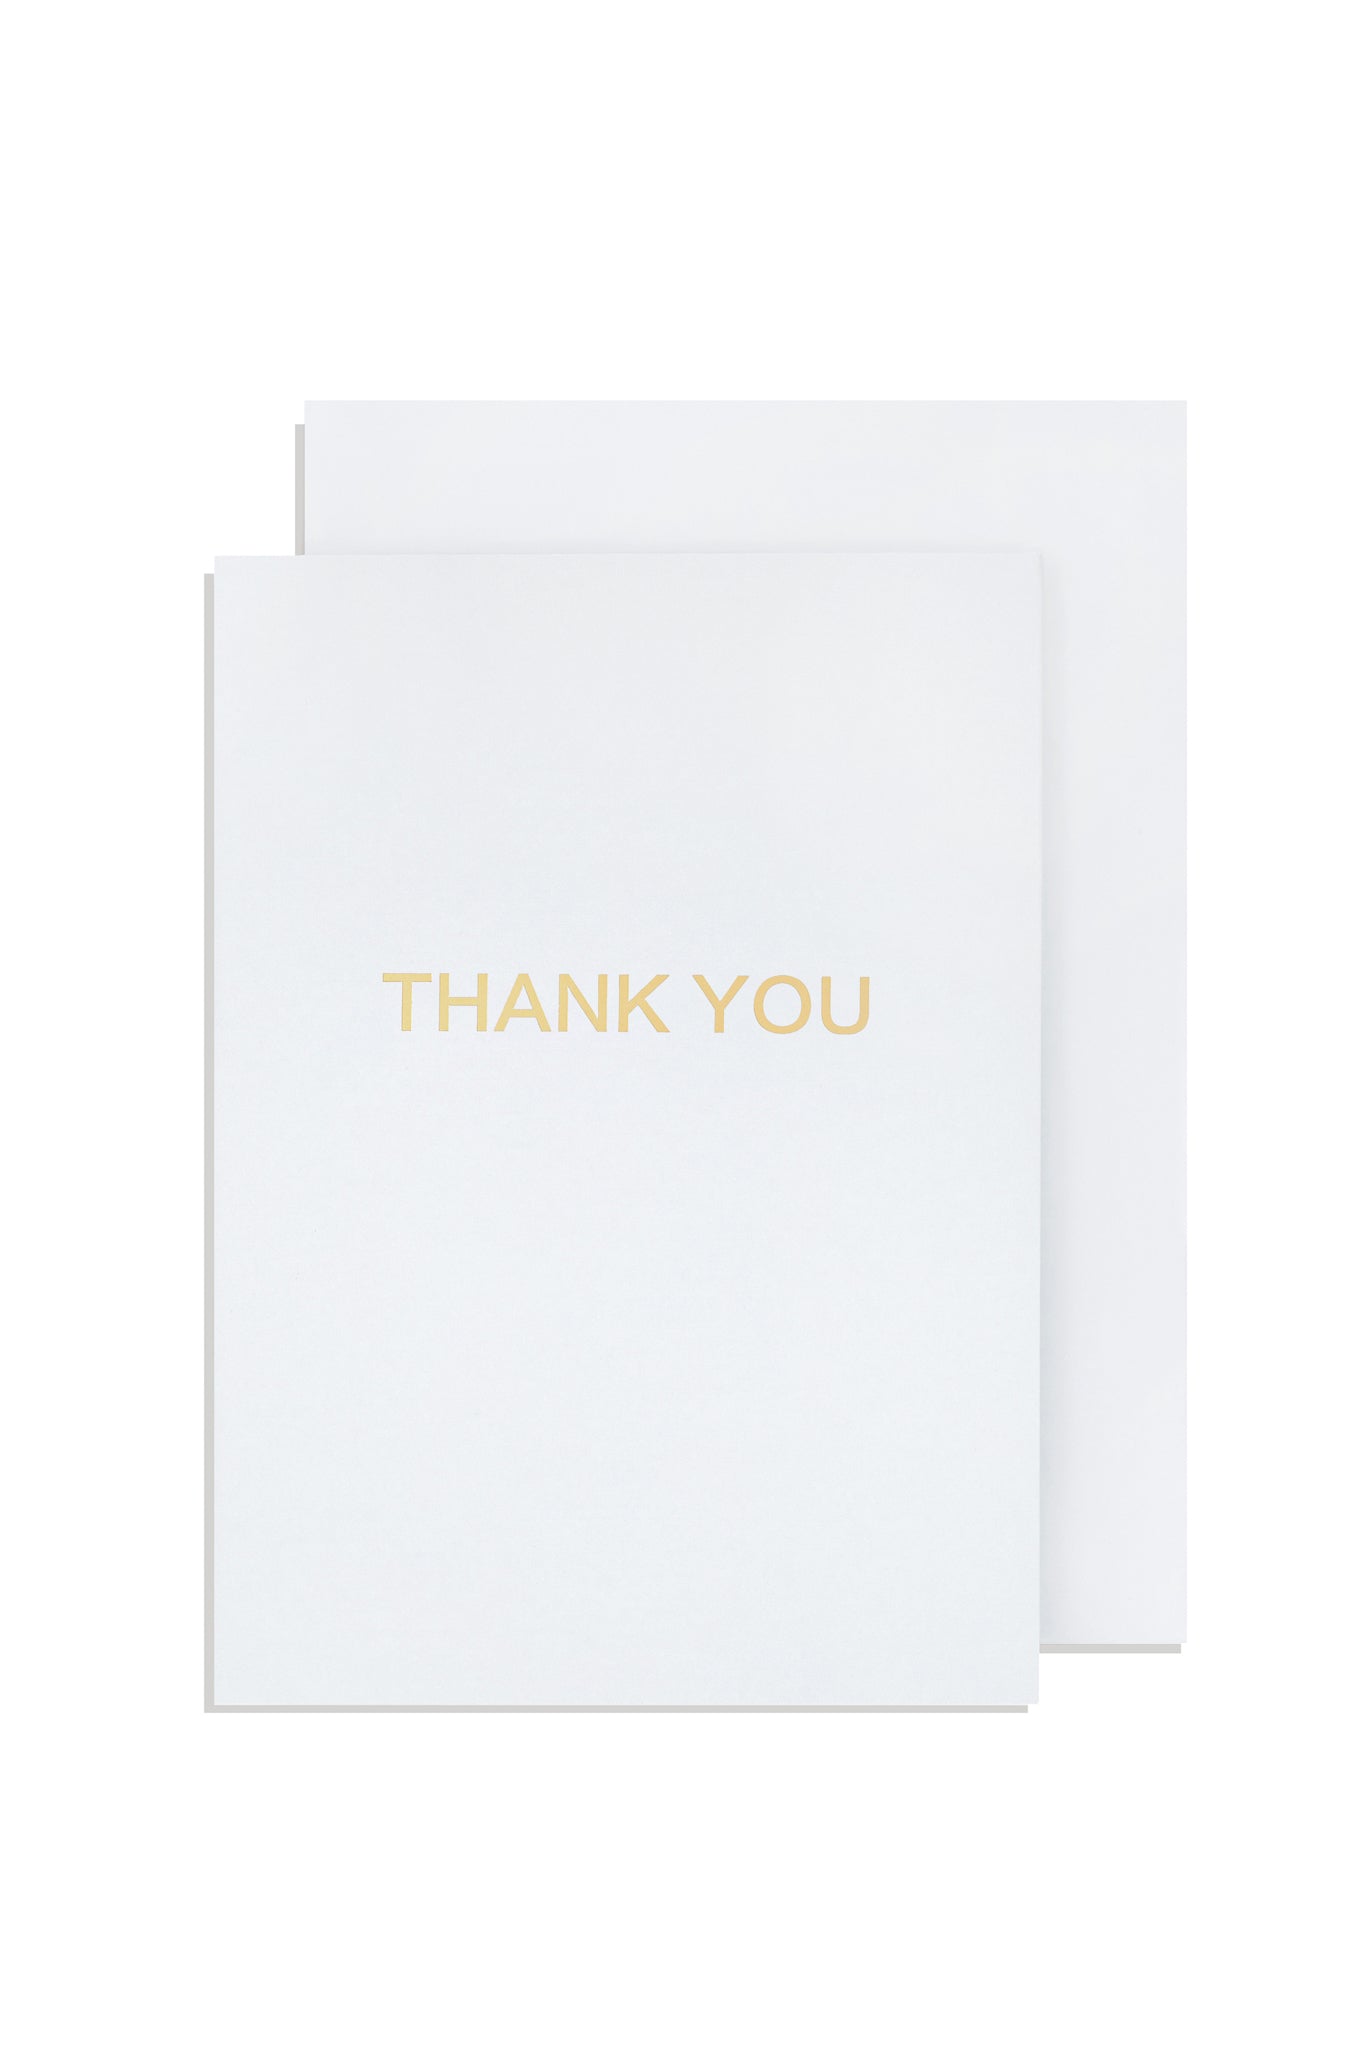 THANK YOU AUDIO GREETINGS CARD